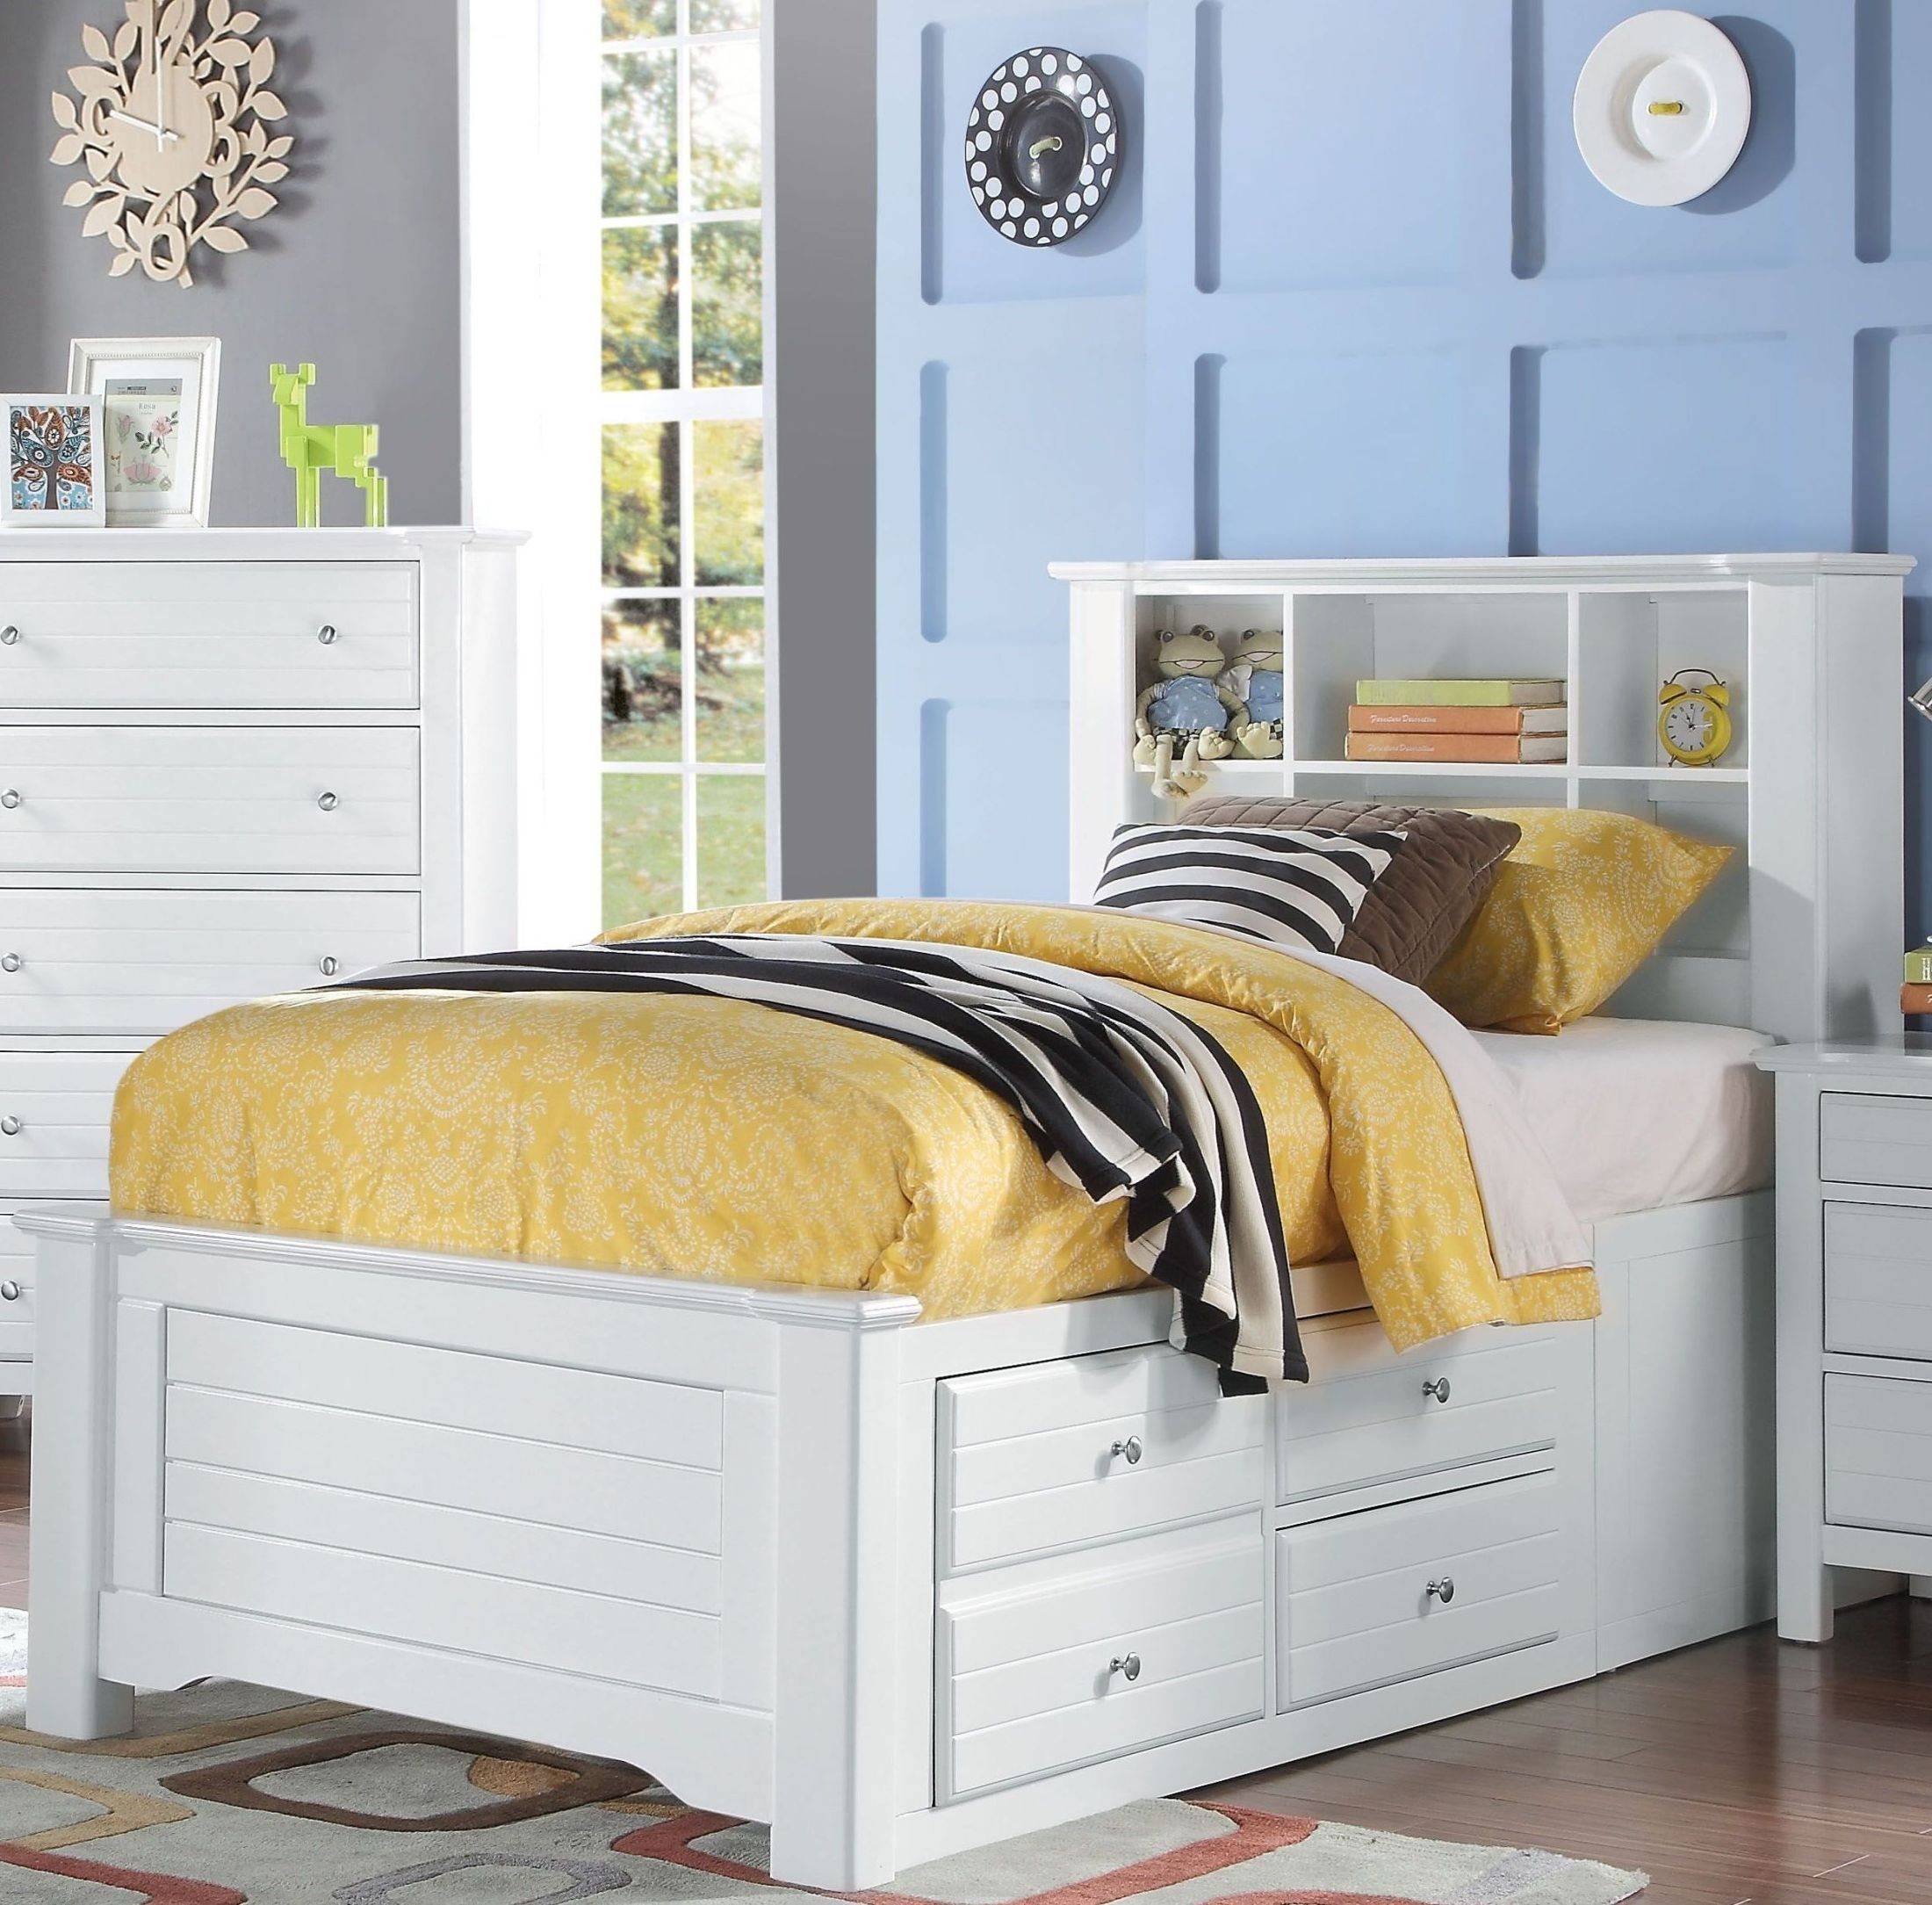 Acme mallowsea white twin bookcase storage bed mallowsea